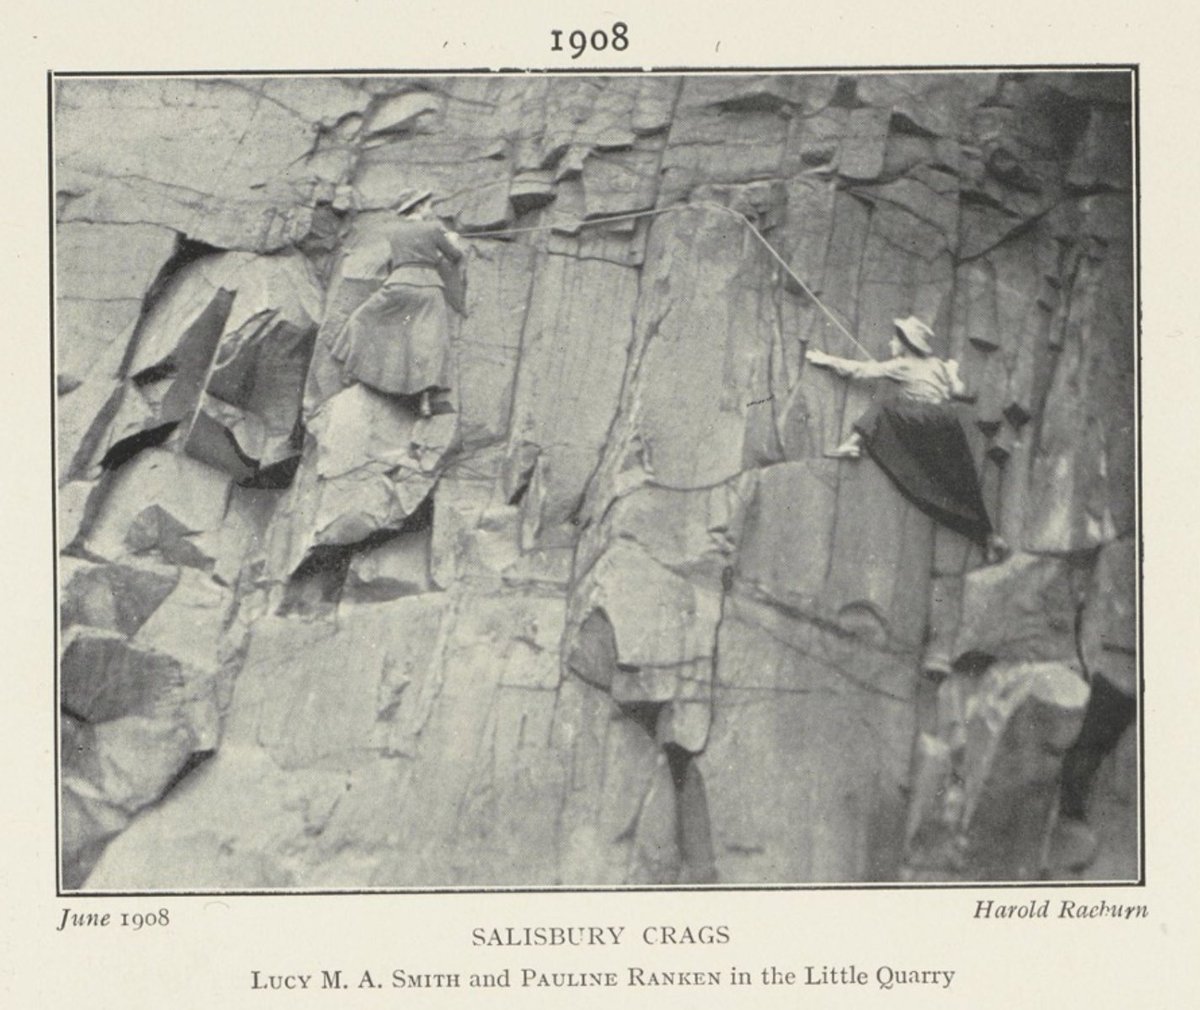 Wrote a short history of Edinburgh's small but active (and growing) climbing scene for the new Climbing Hangar centre. Interesting to find out via my research that I regularly run around the burial site of Harold Raeburn (Everest 1921 exped leader)! theclimbinghangar.com/blog/a-short-h…